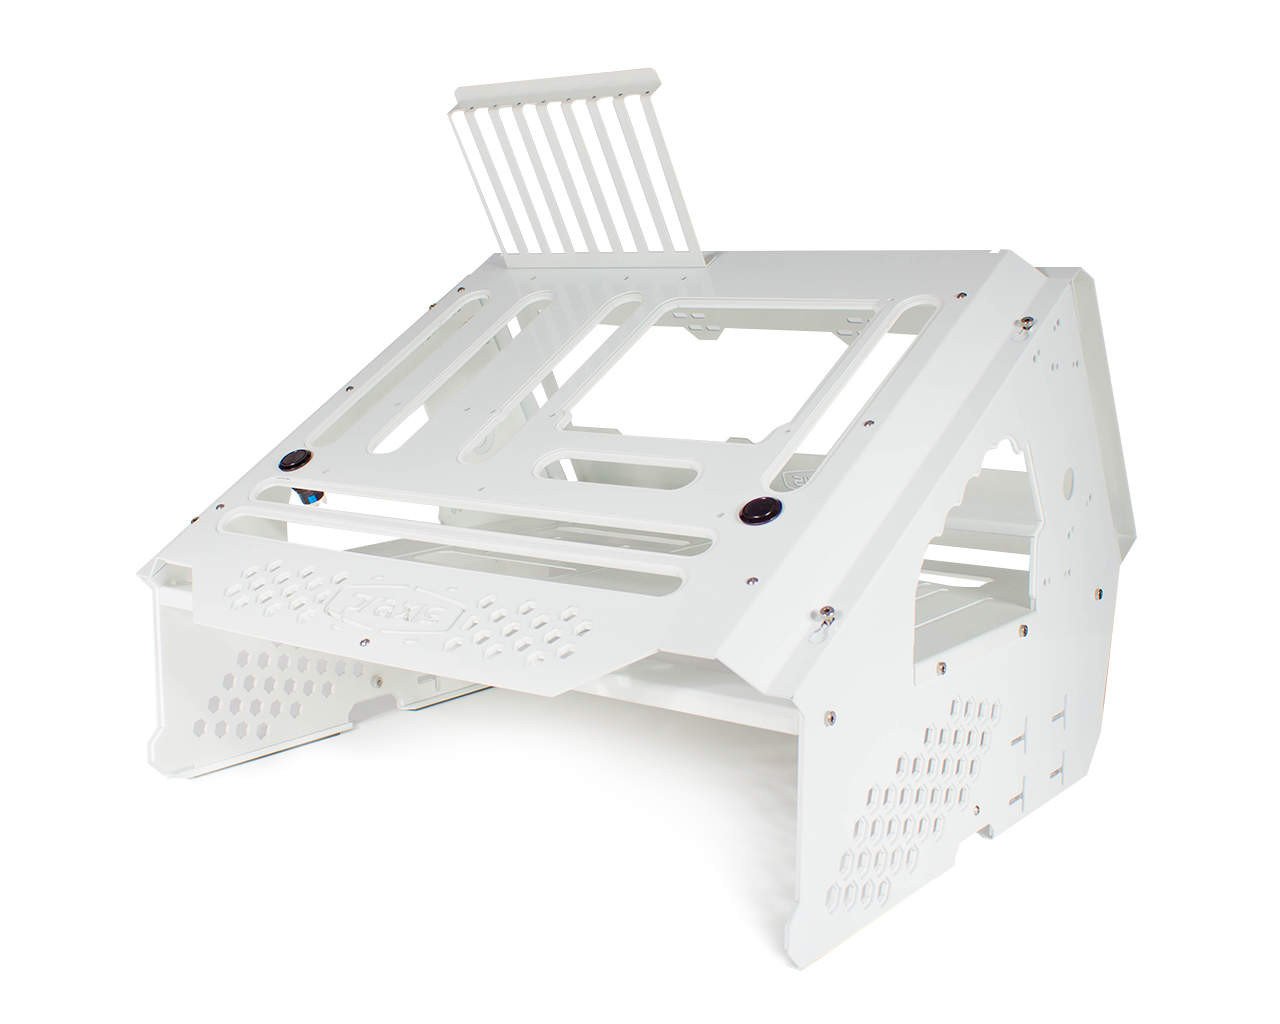 Praxis WetBench - PrimoChill - KEEPING IT COOL White w/White Accents